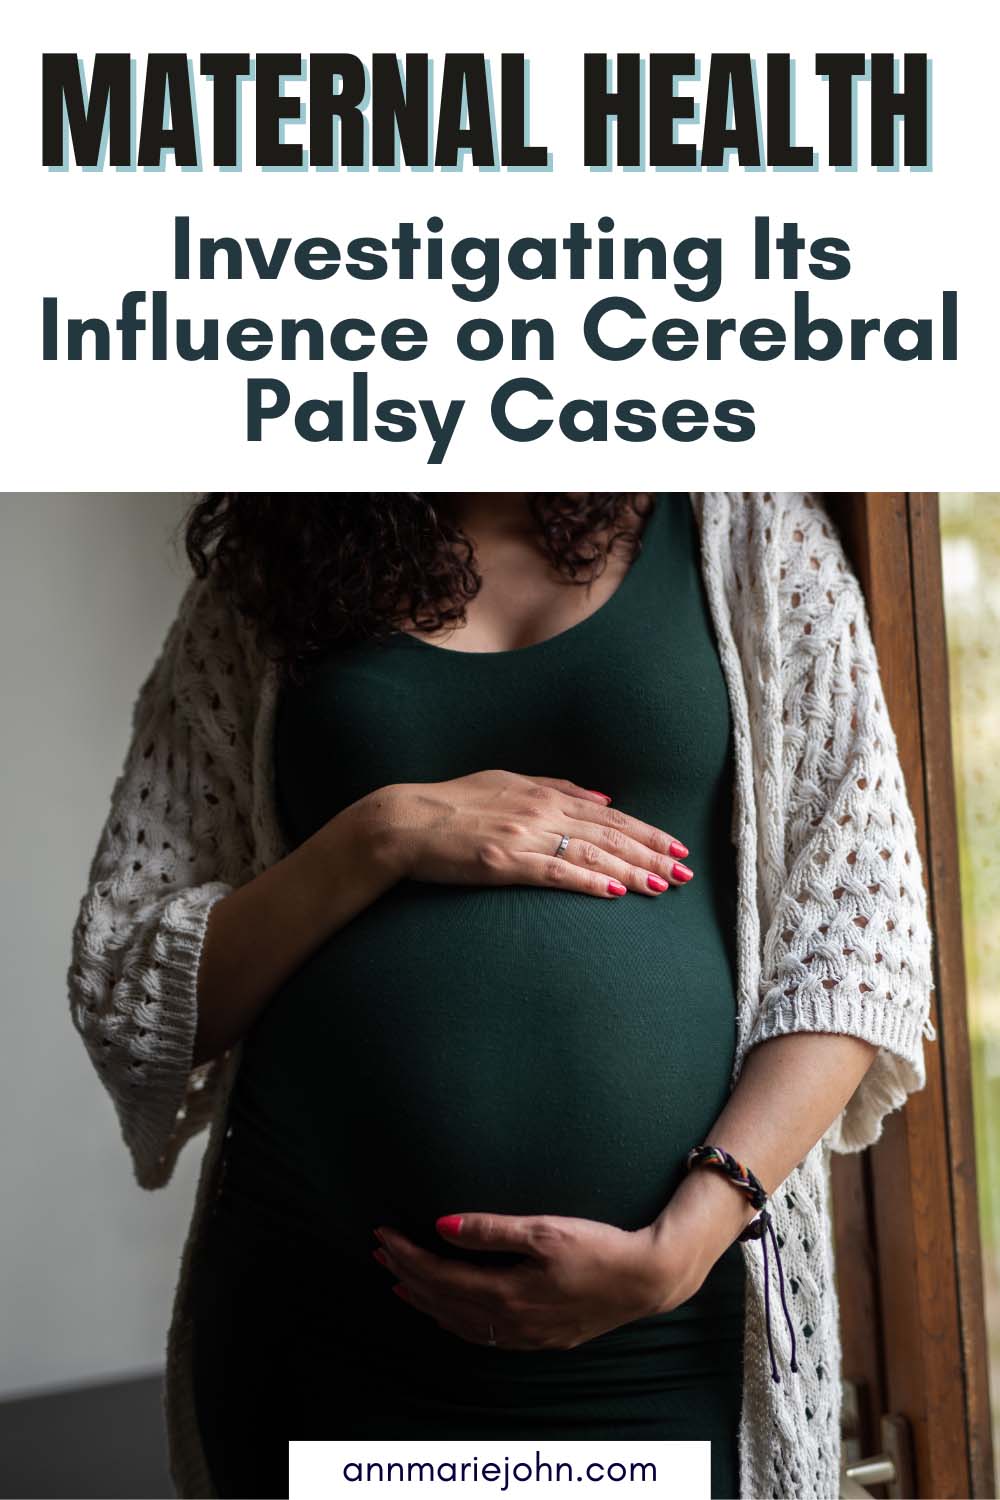 Maternal Health and Cerebral Palsy Cases